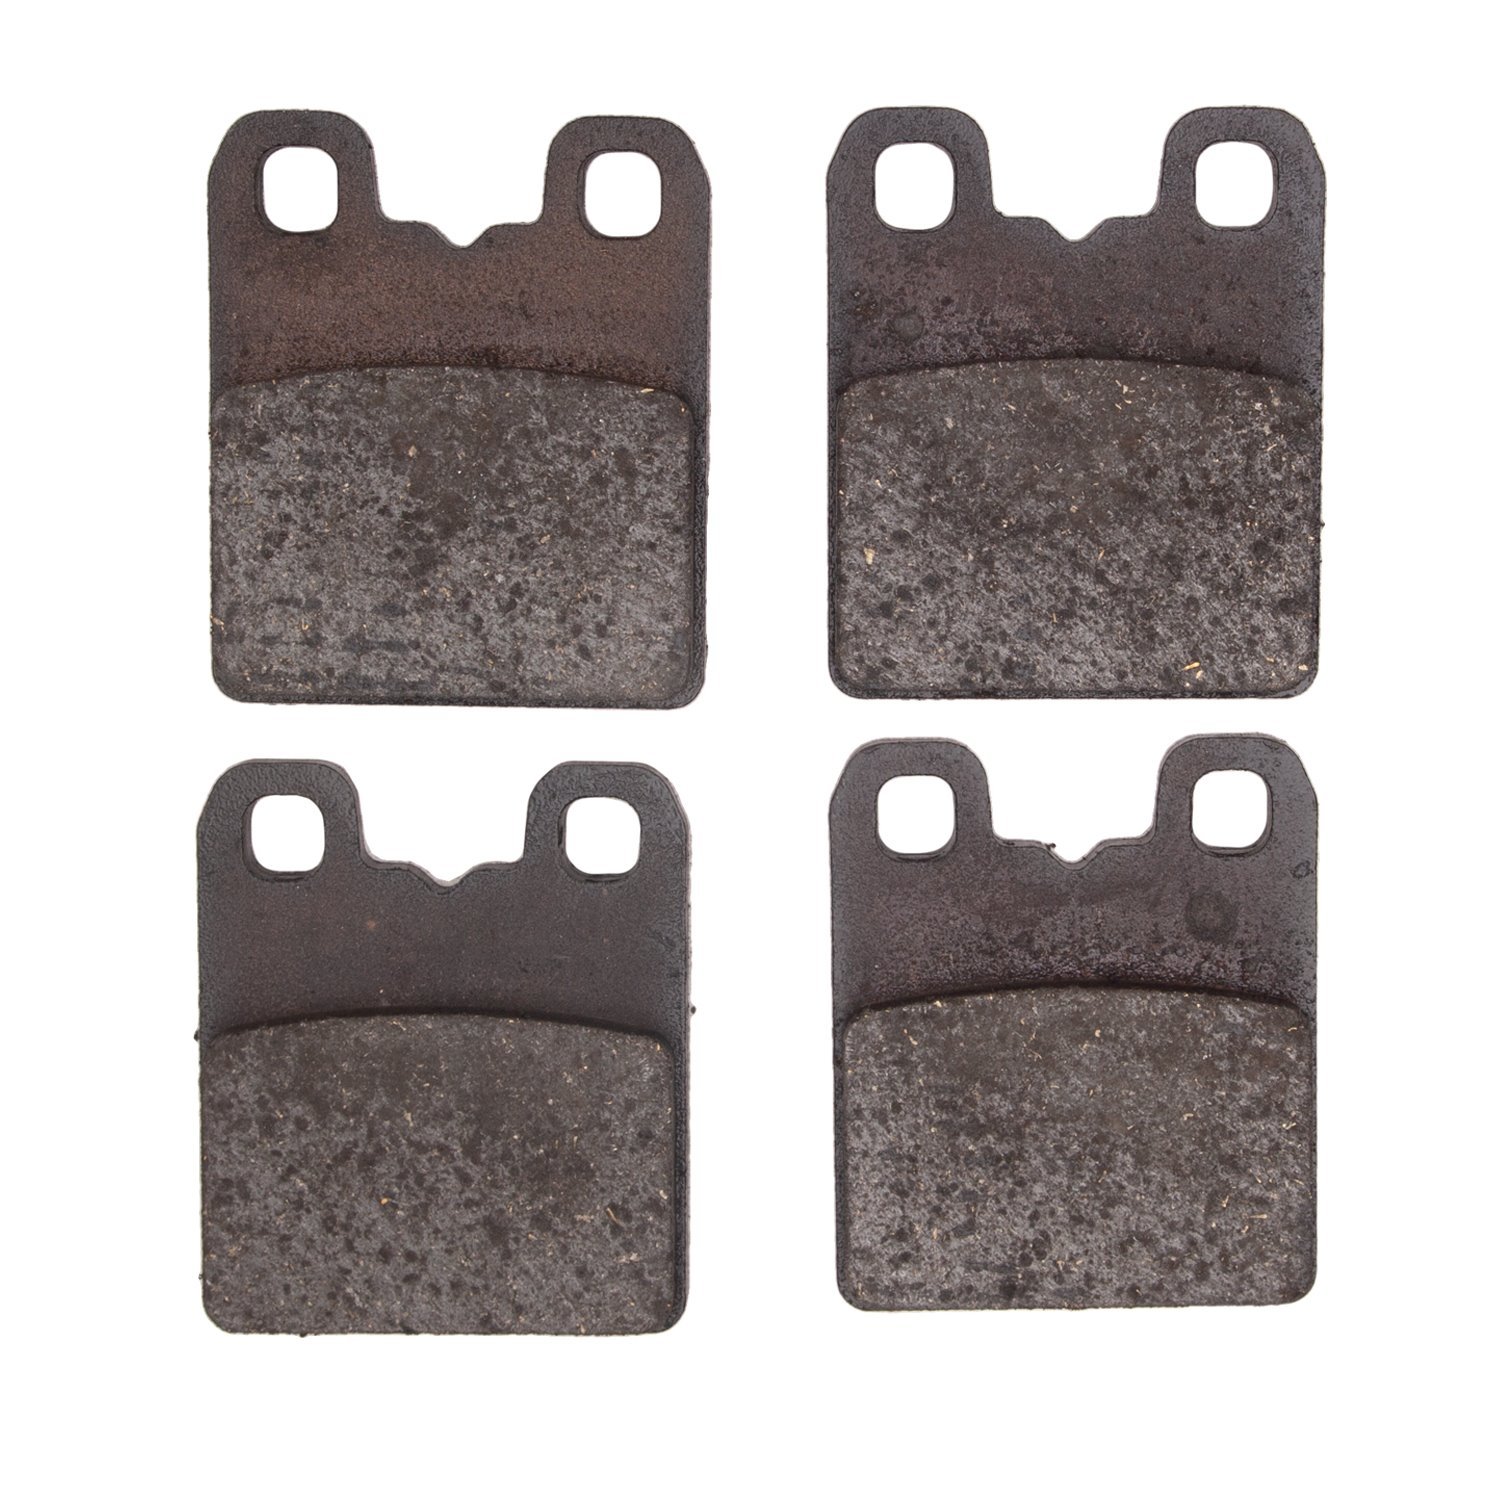 1551-2069-00 5000 Advanced Low-Metallic Brake Pads, Fits Select Multiple Makes/Models, Position: Parking